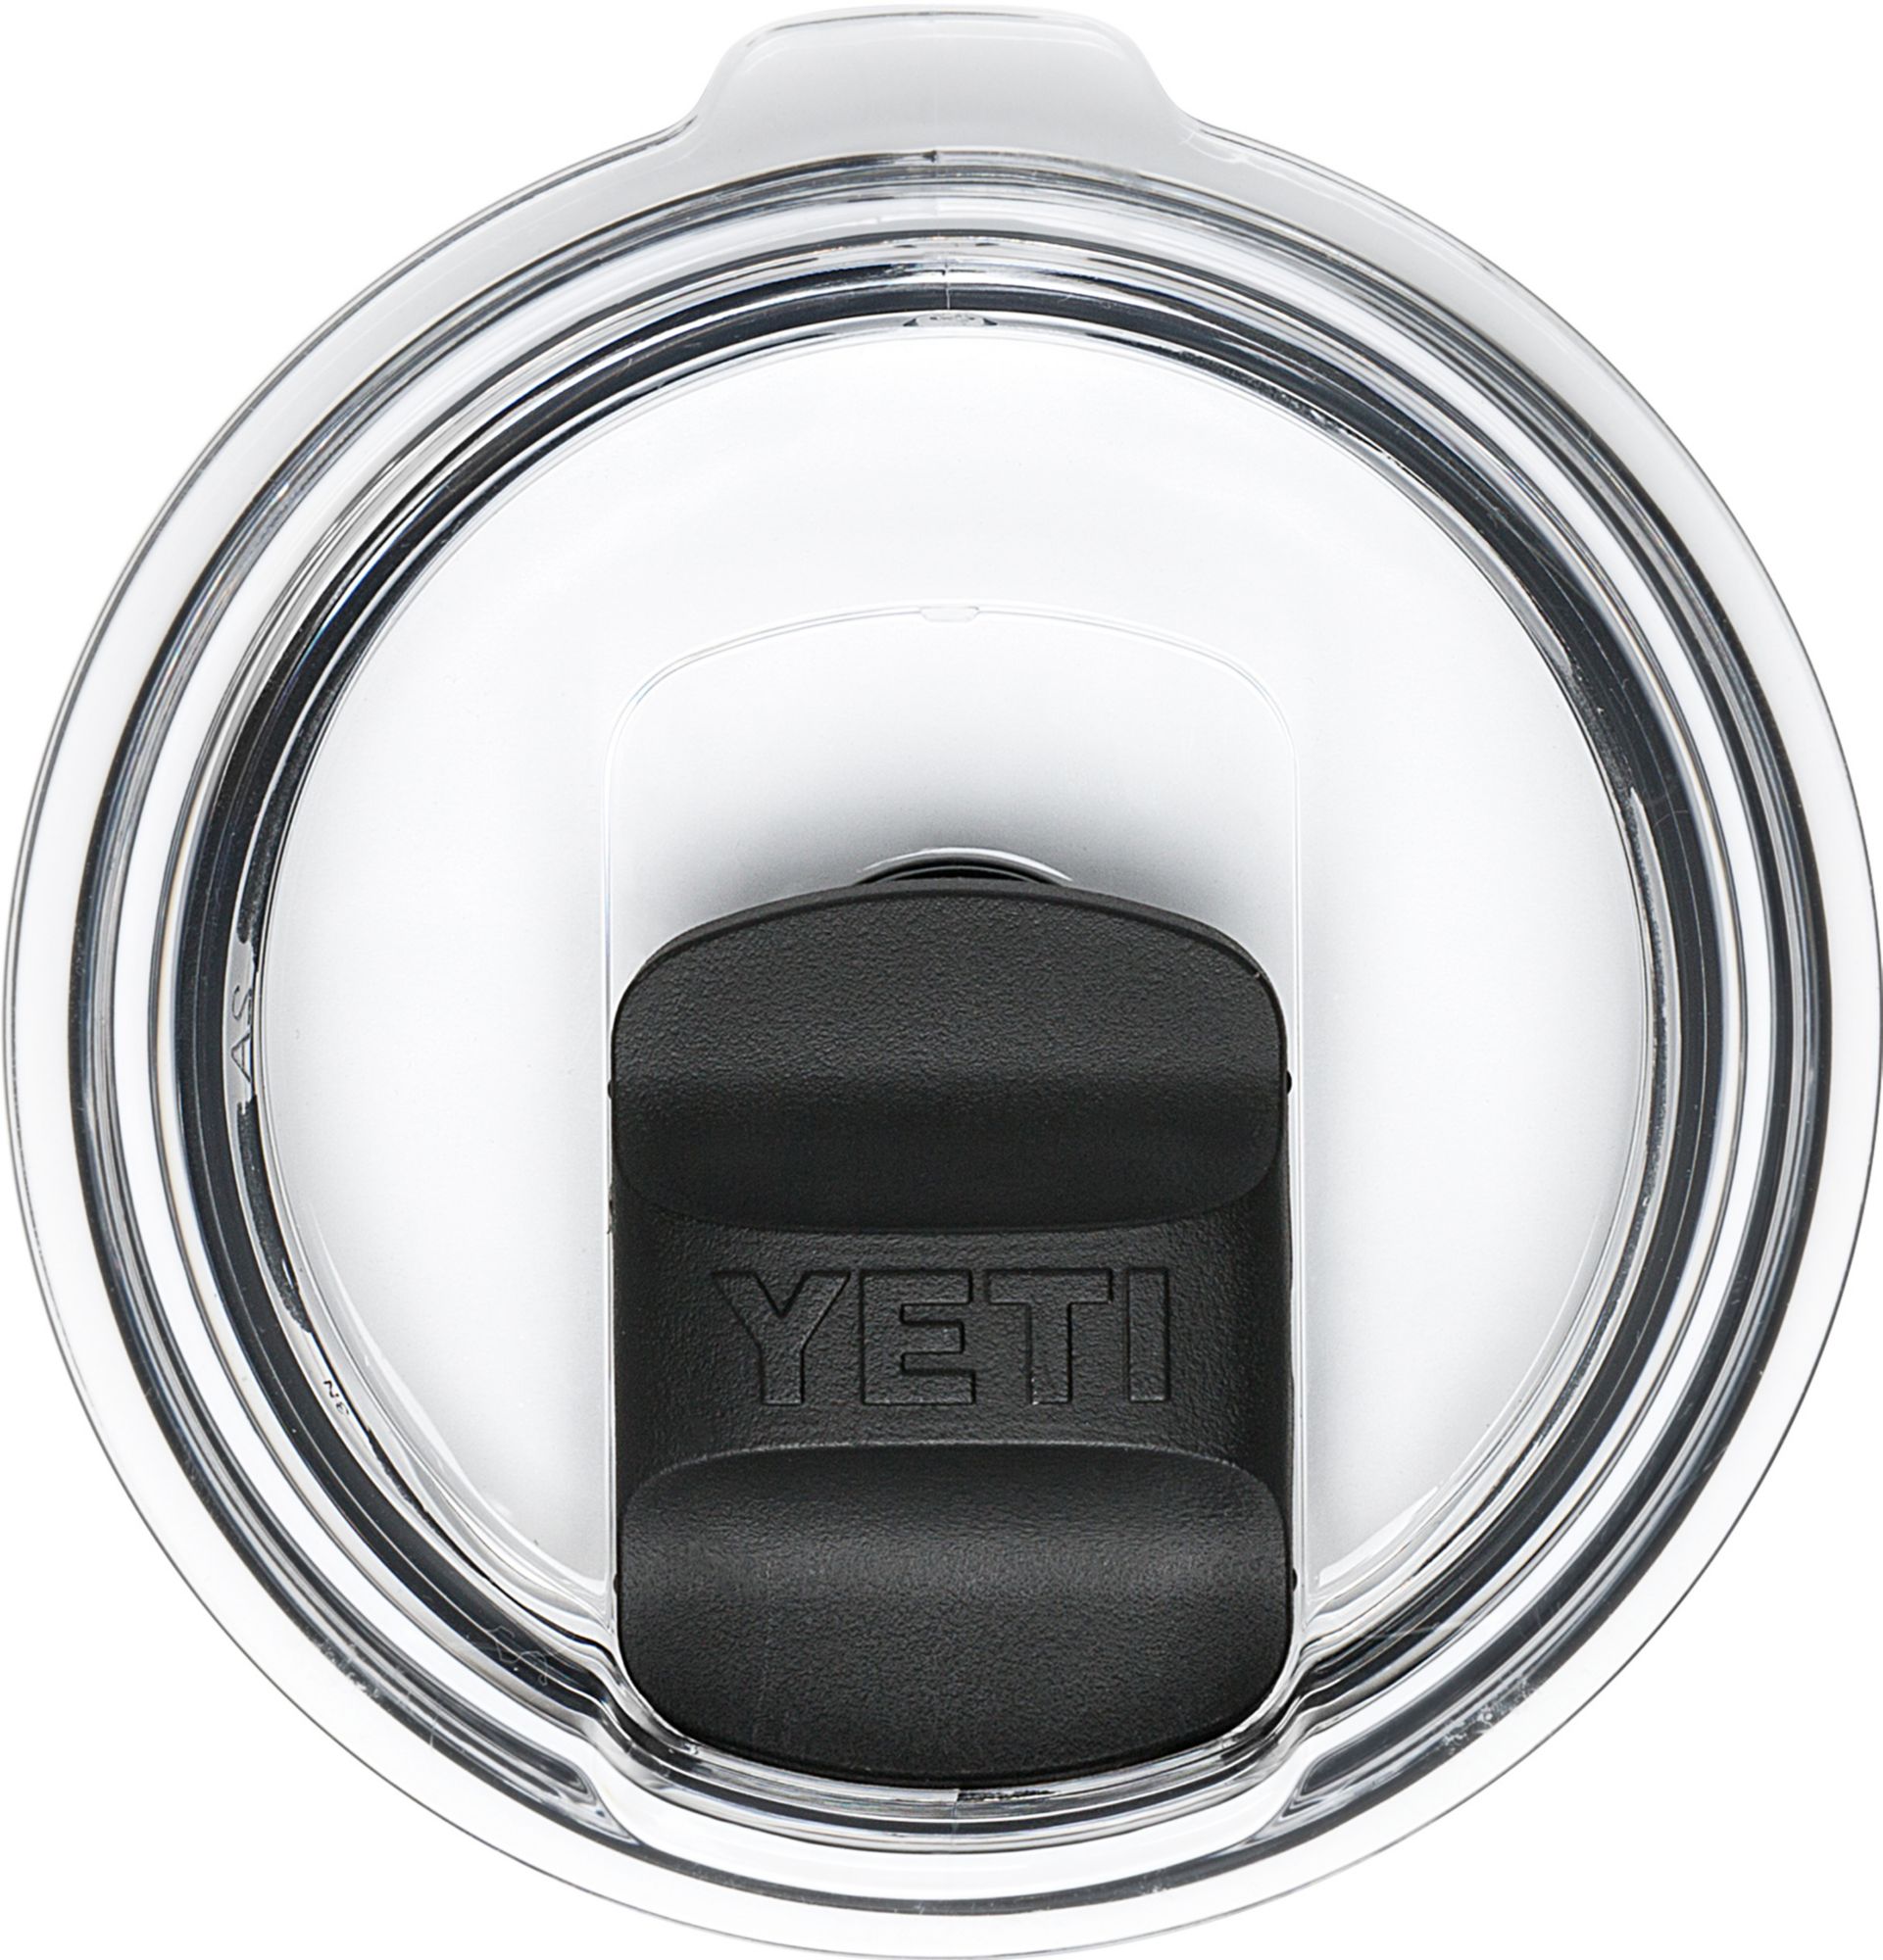 yeti cup top replacement